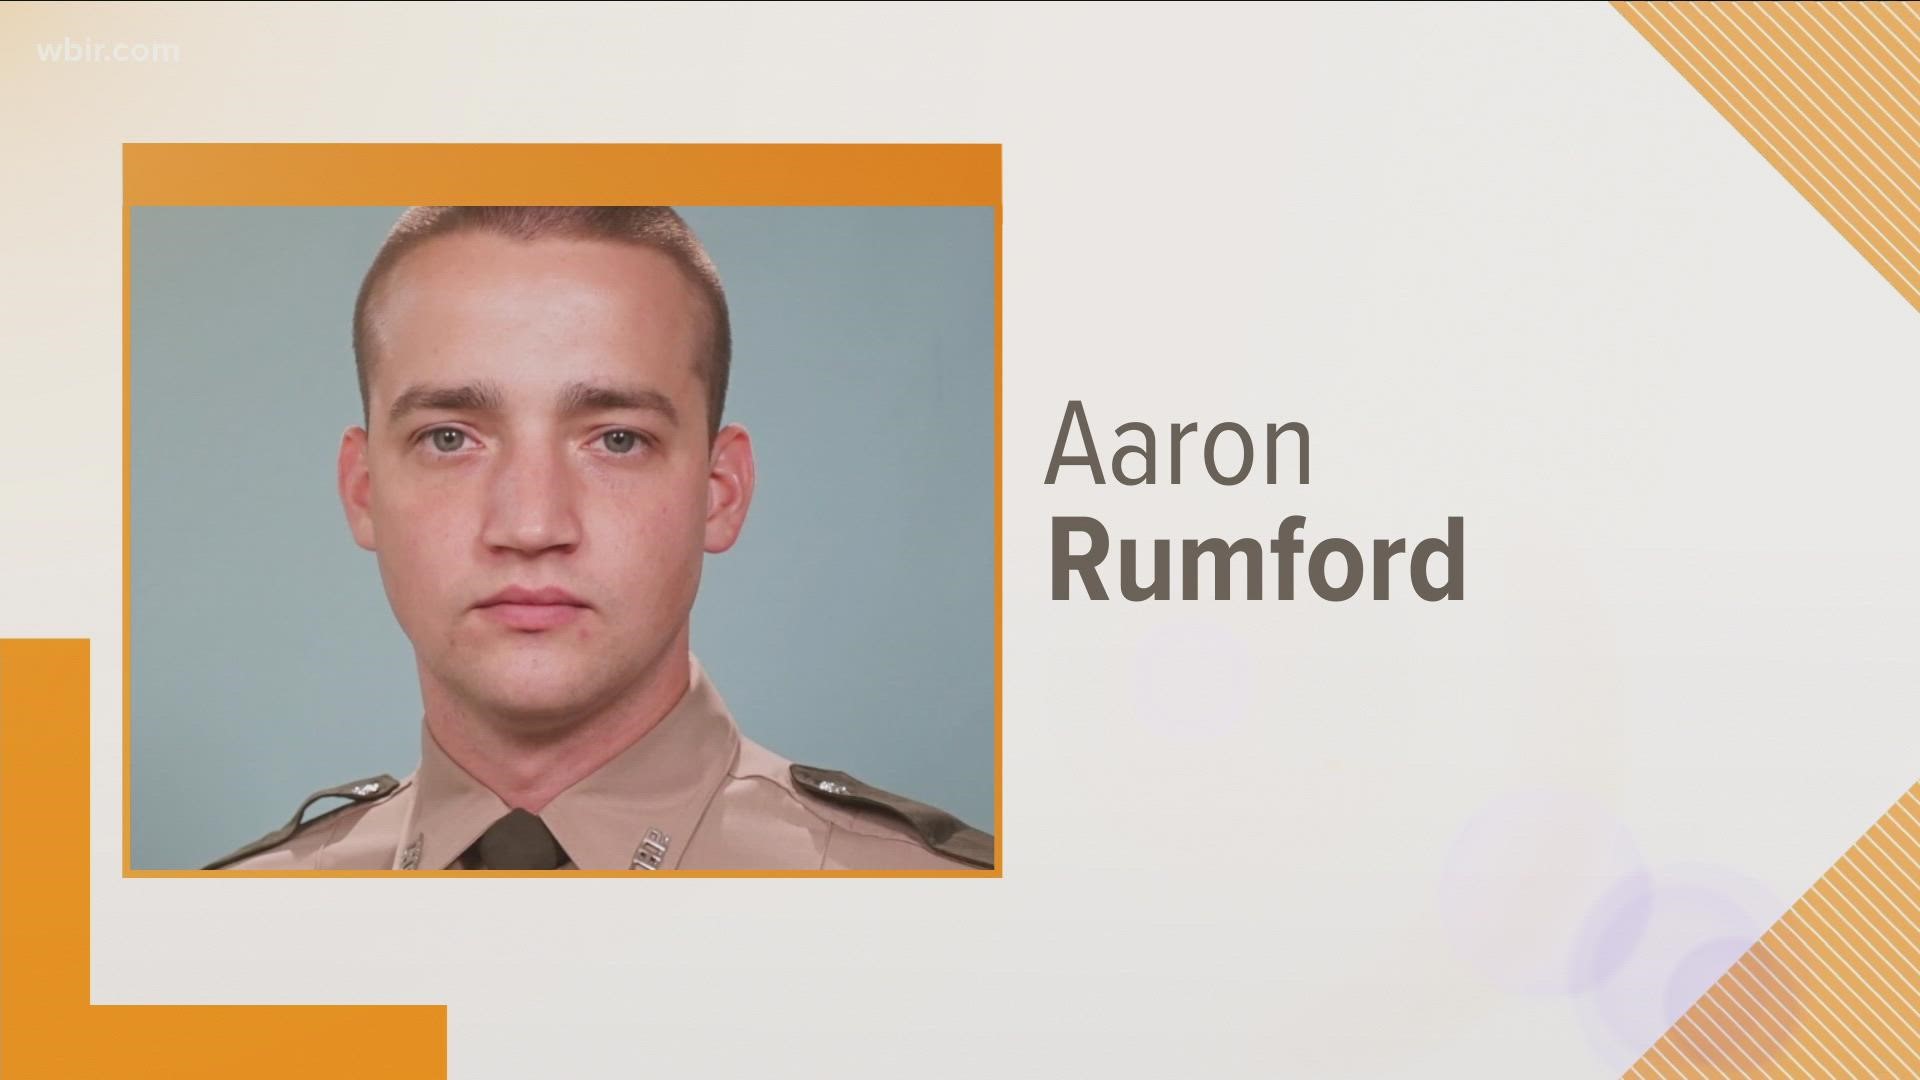 Trooper Aaron Rumford joined the THP in 2015 and was assigned to the Nashville District in Wilson County.